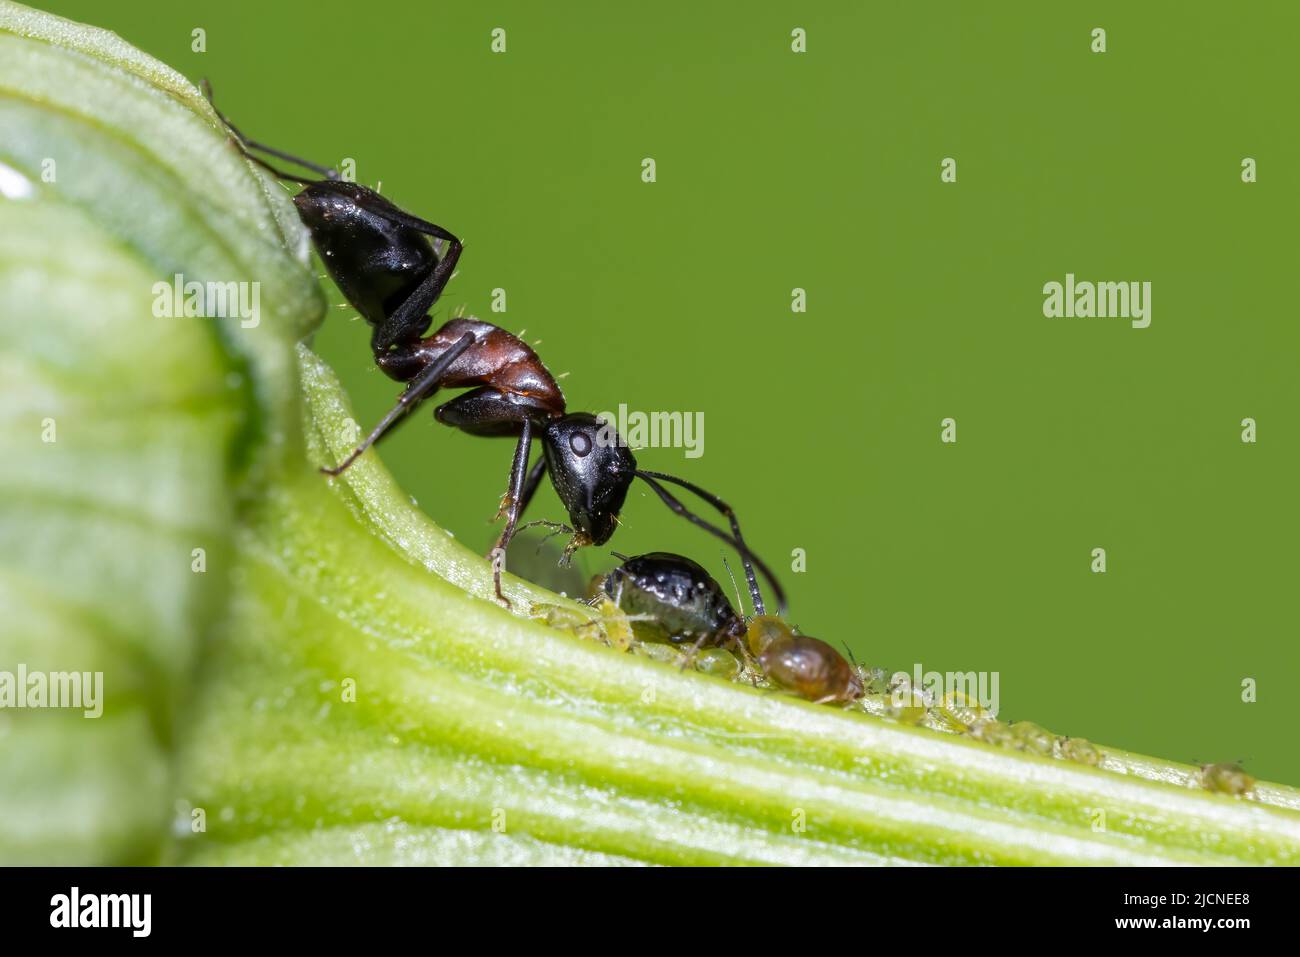 ant and aphid symbiotic relationship Stock Photo